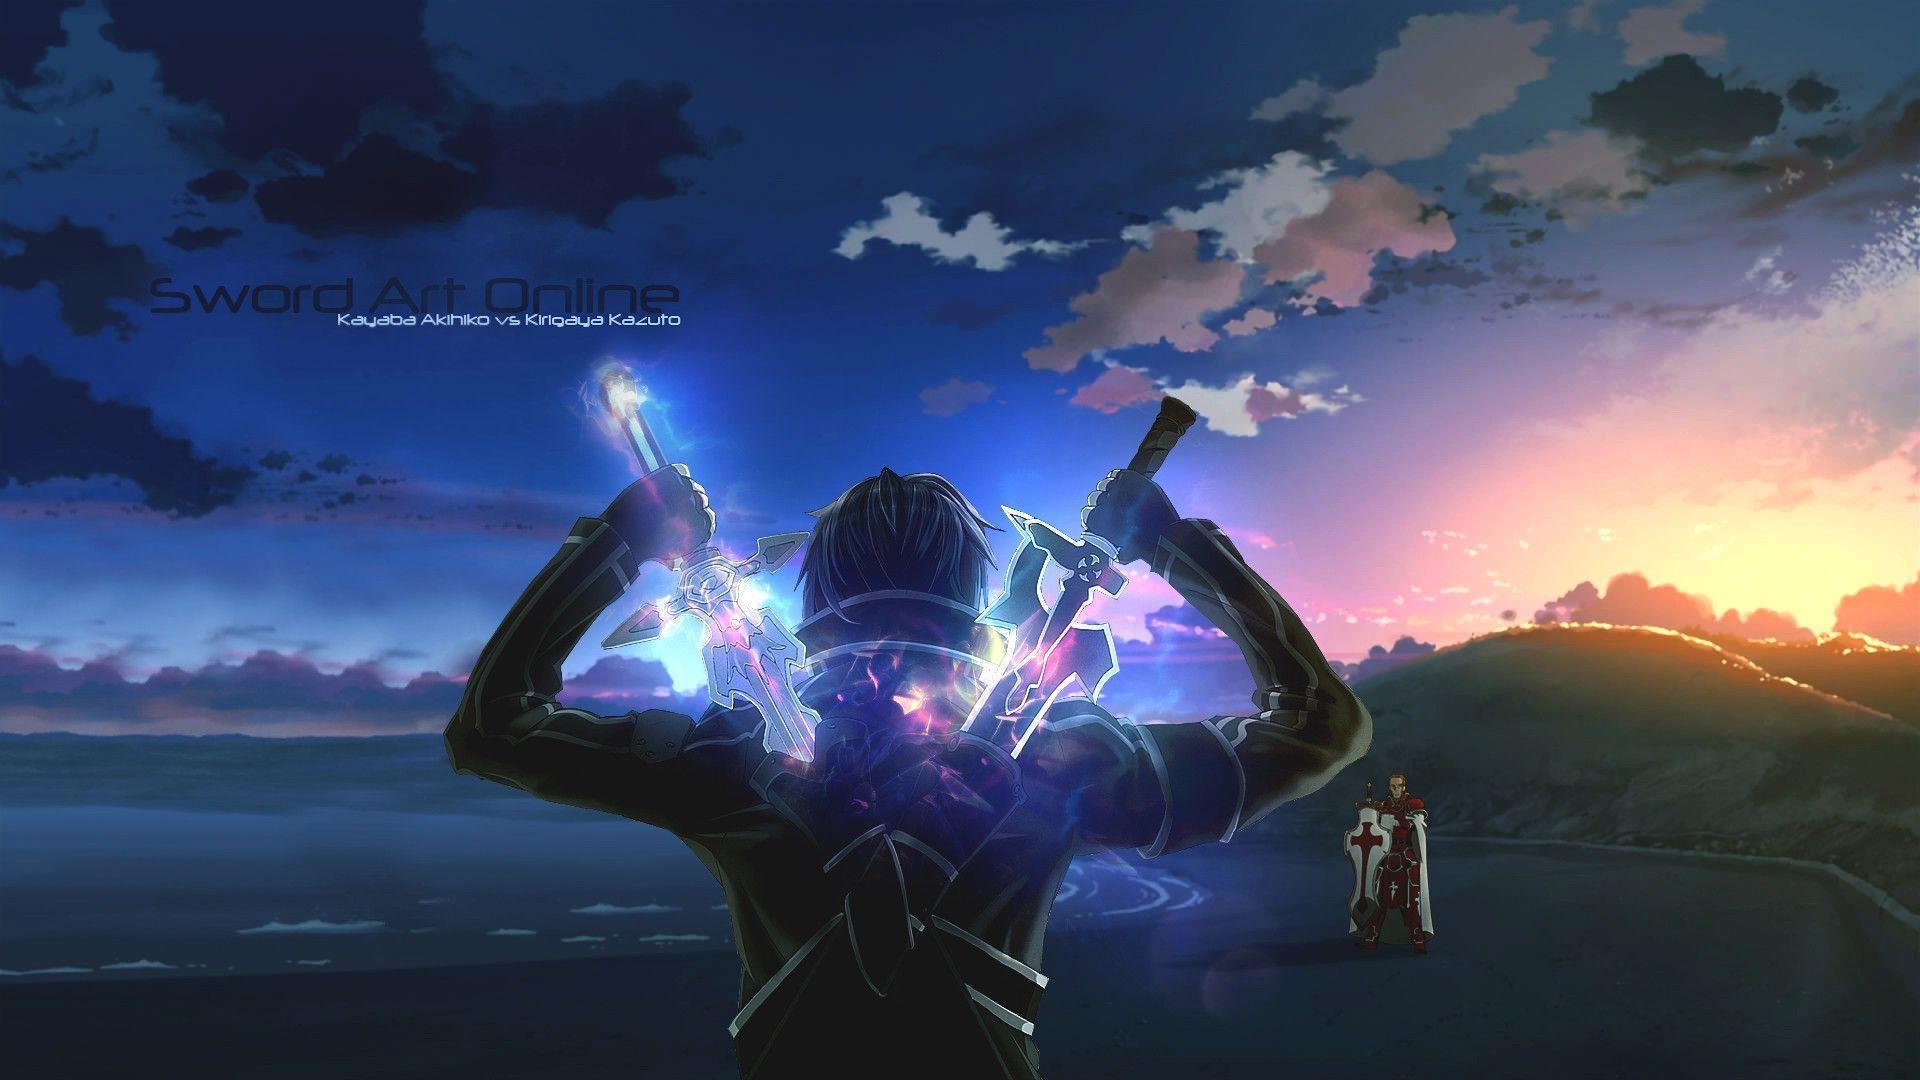 Epic Anime Wallpapers - Top Free Epic